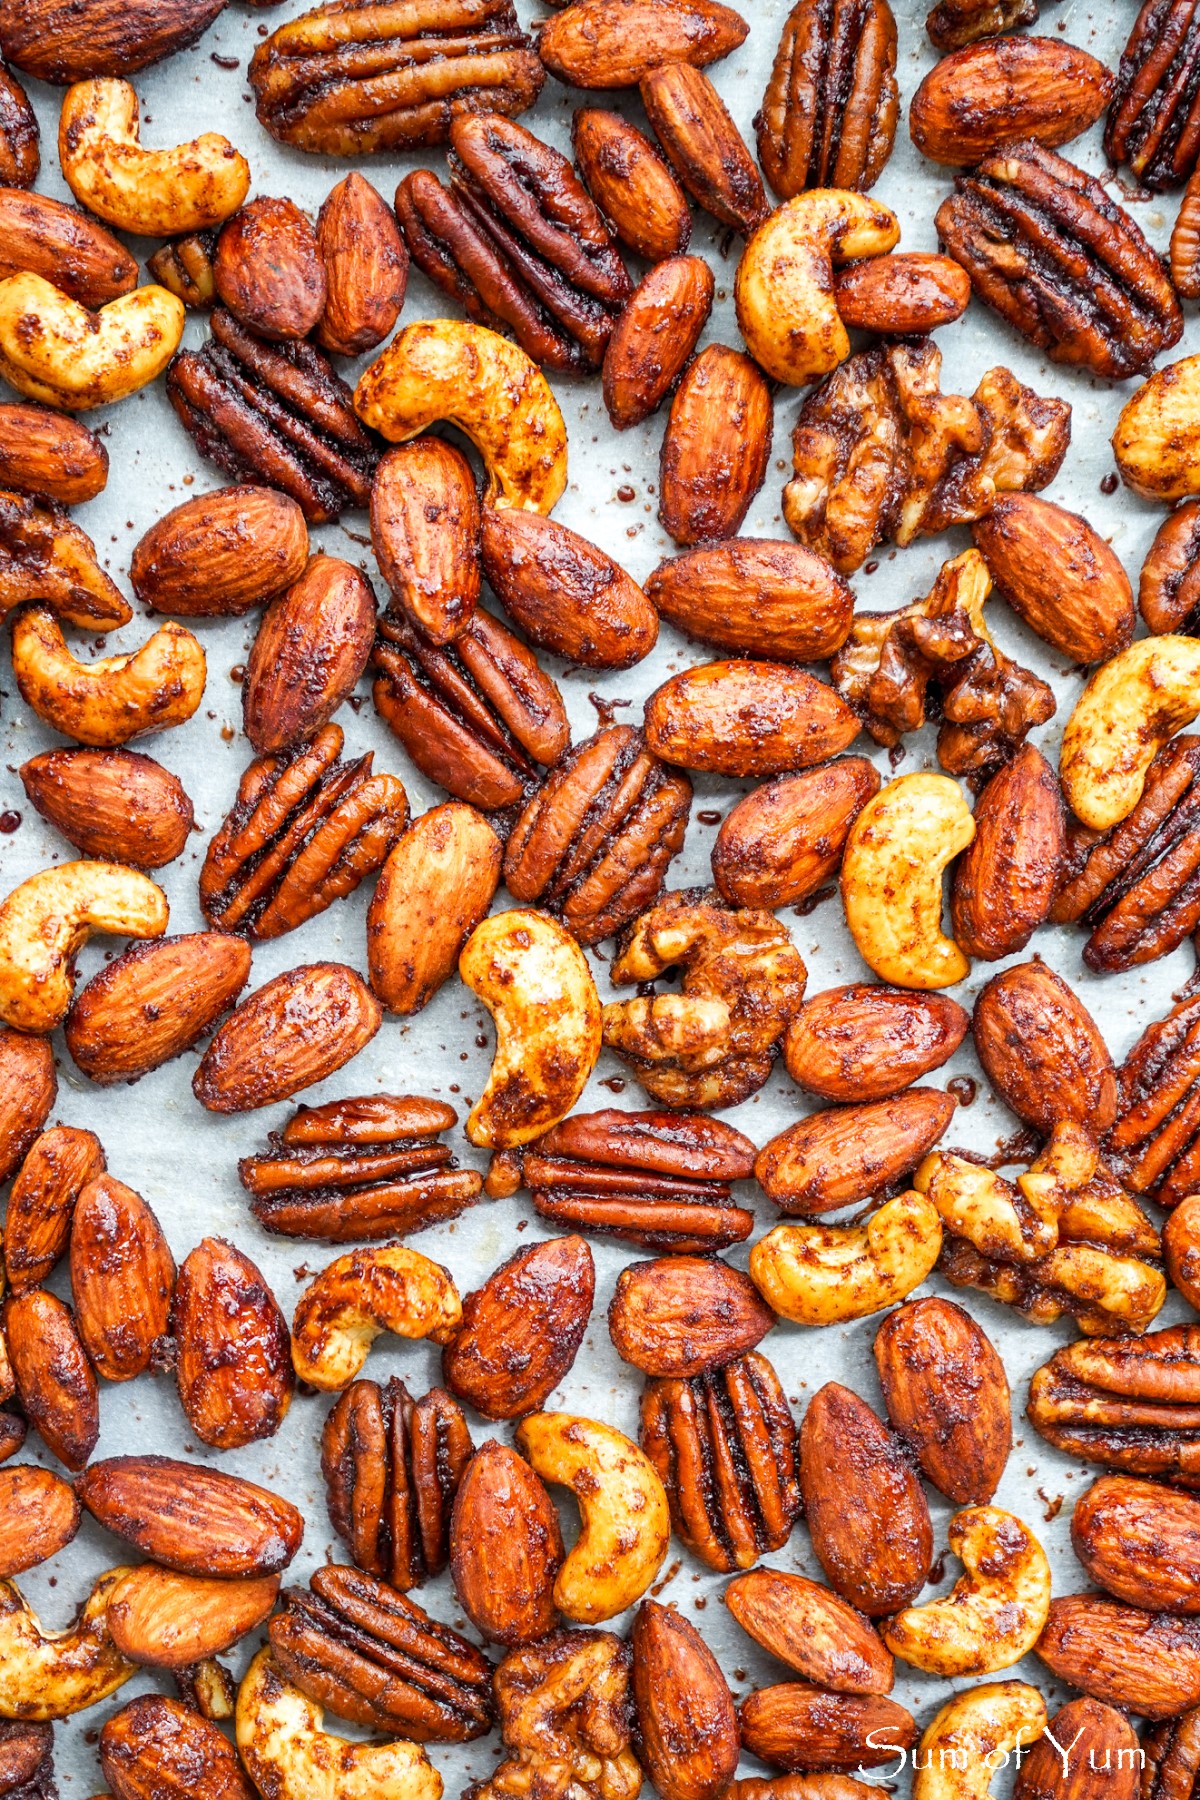 Spiced Rum Glazed Mixed Nuts 